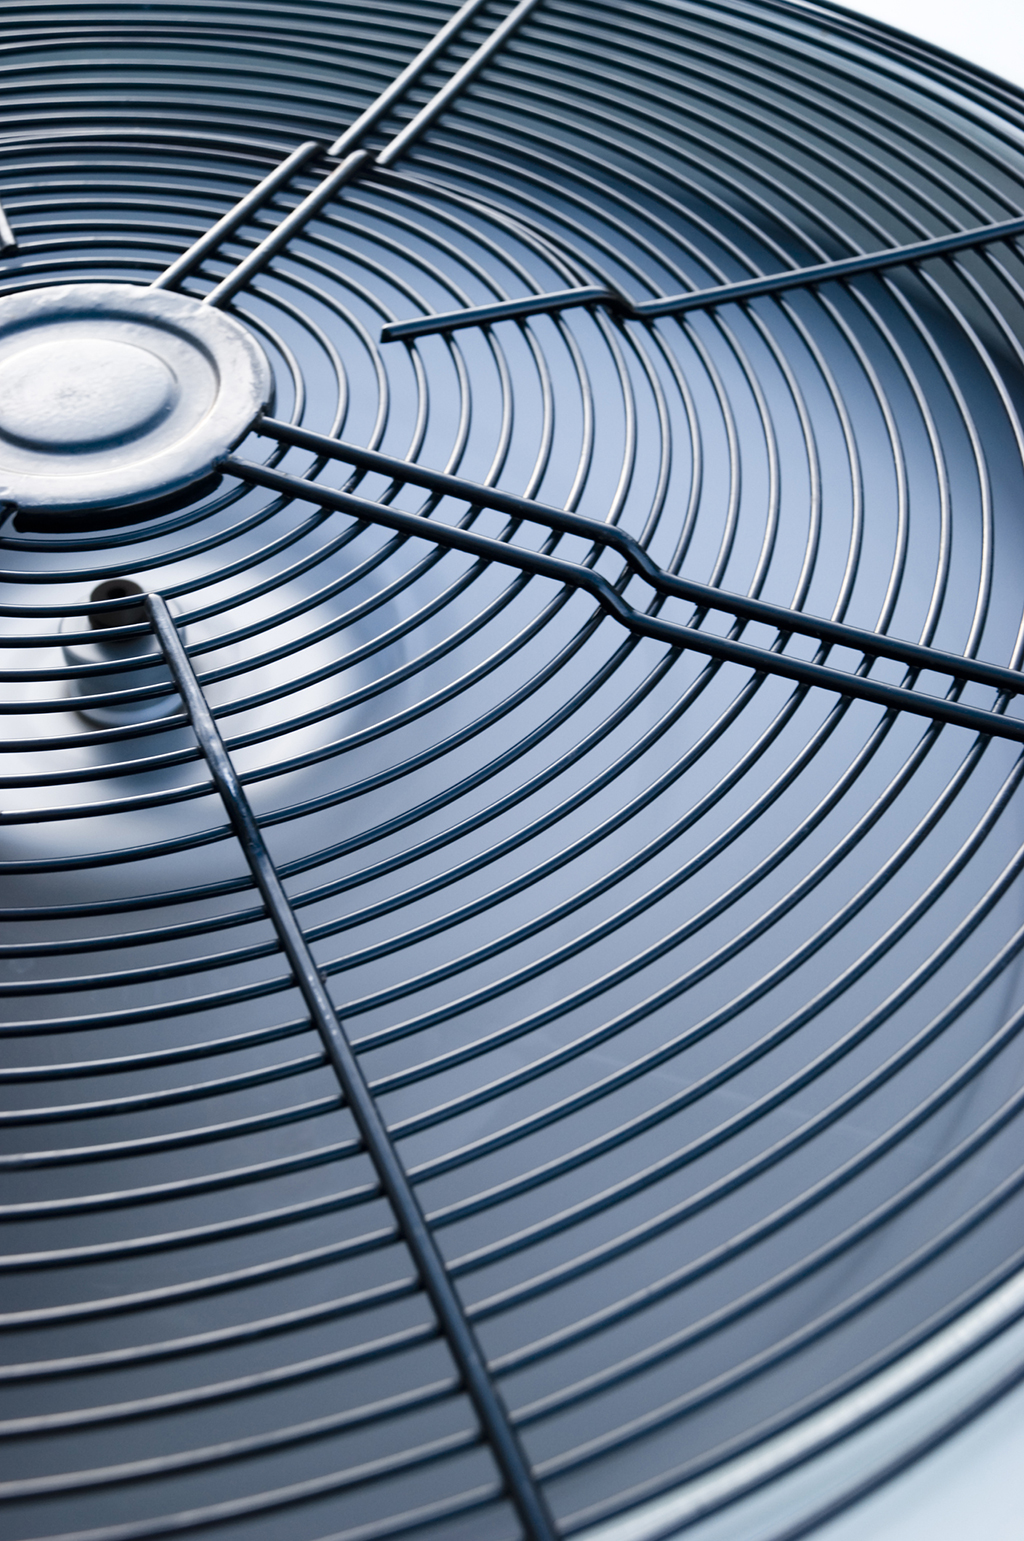 Making Sure Your HVAC Is Running Smoothly Isn’t Optional Anymore, So Depend On Us For Expert AC Repair Services | Fort Worth, TX